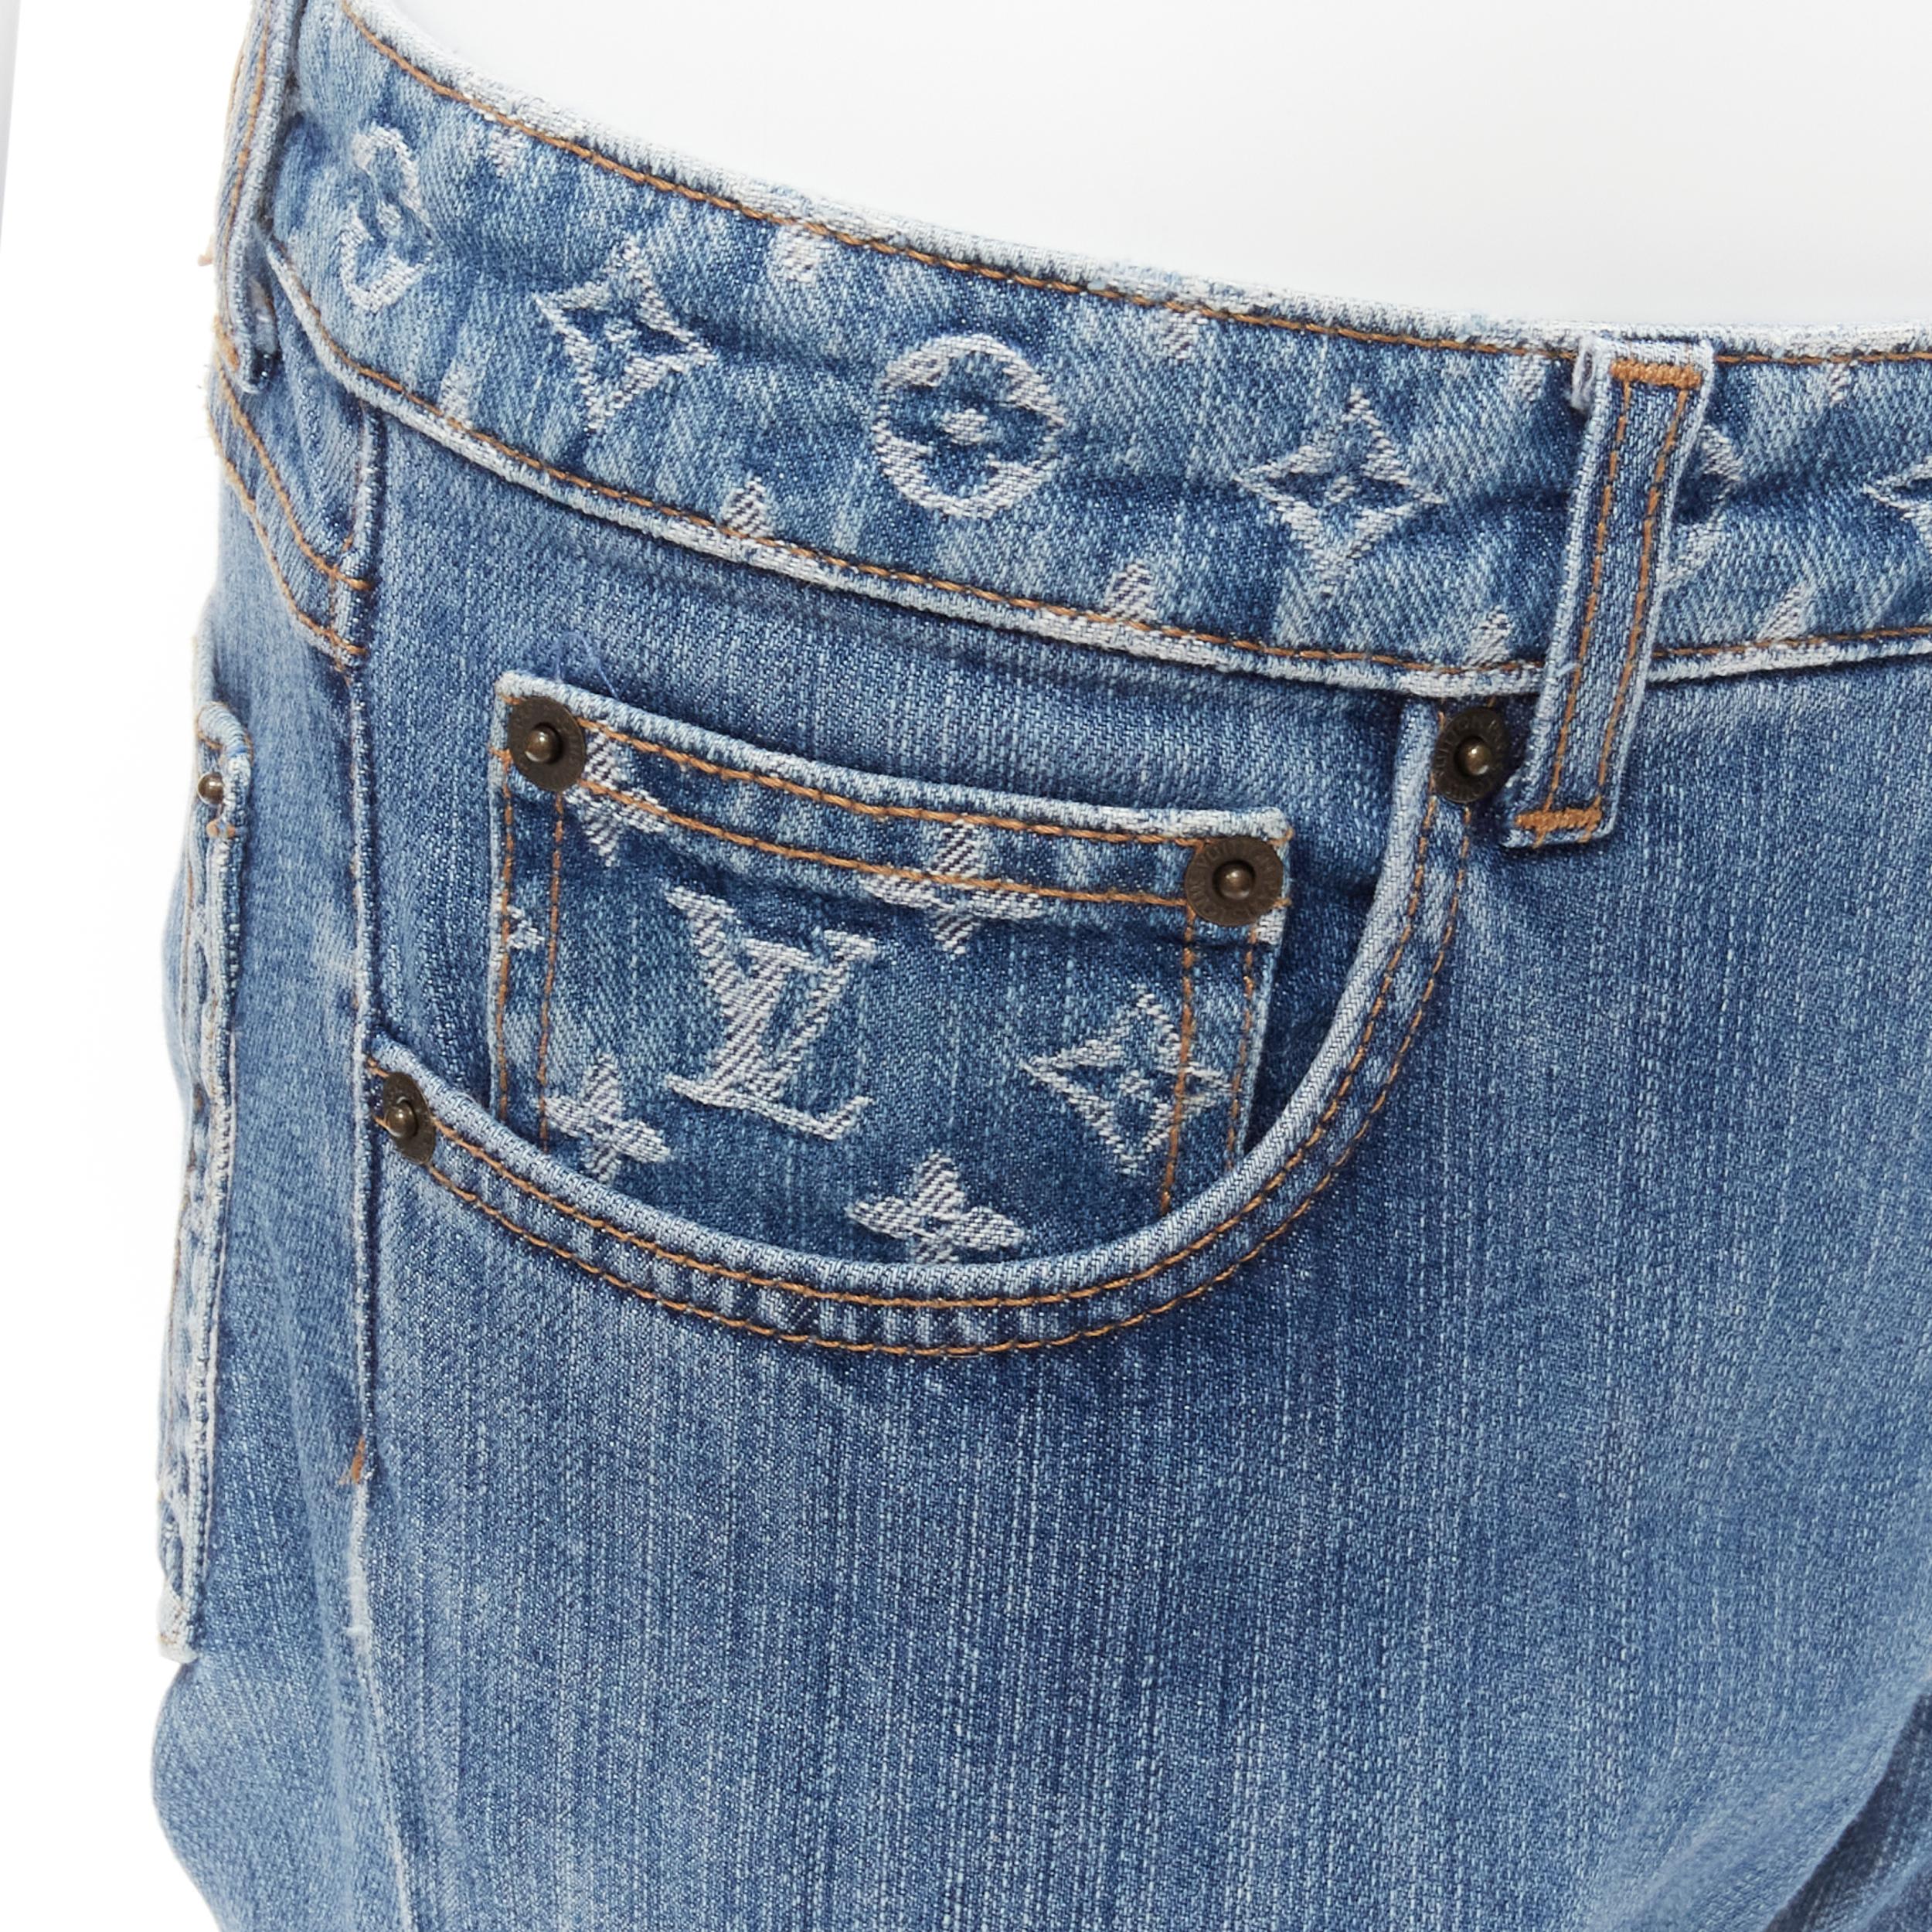 LOUIS VUITTON LV monogram logo pocket washed cropped flare jeans FR38 M
Reference: TGAS/C01990
Brand: Louis Vuitton
Designer: Marc Jacobs
Material: Cotton
Color: Blue
Pattern: Monogram
Closure: Zip Fly
Made in: Italy

CONDITION:
Condition: Very